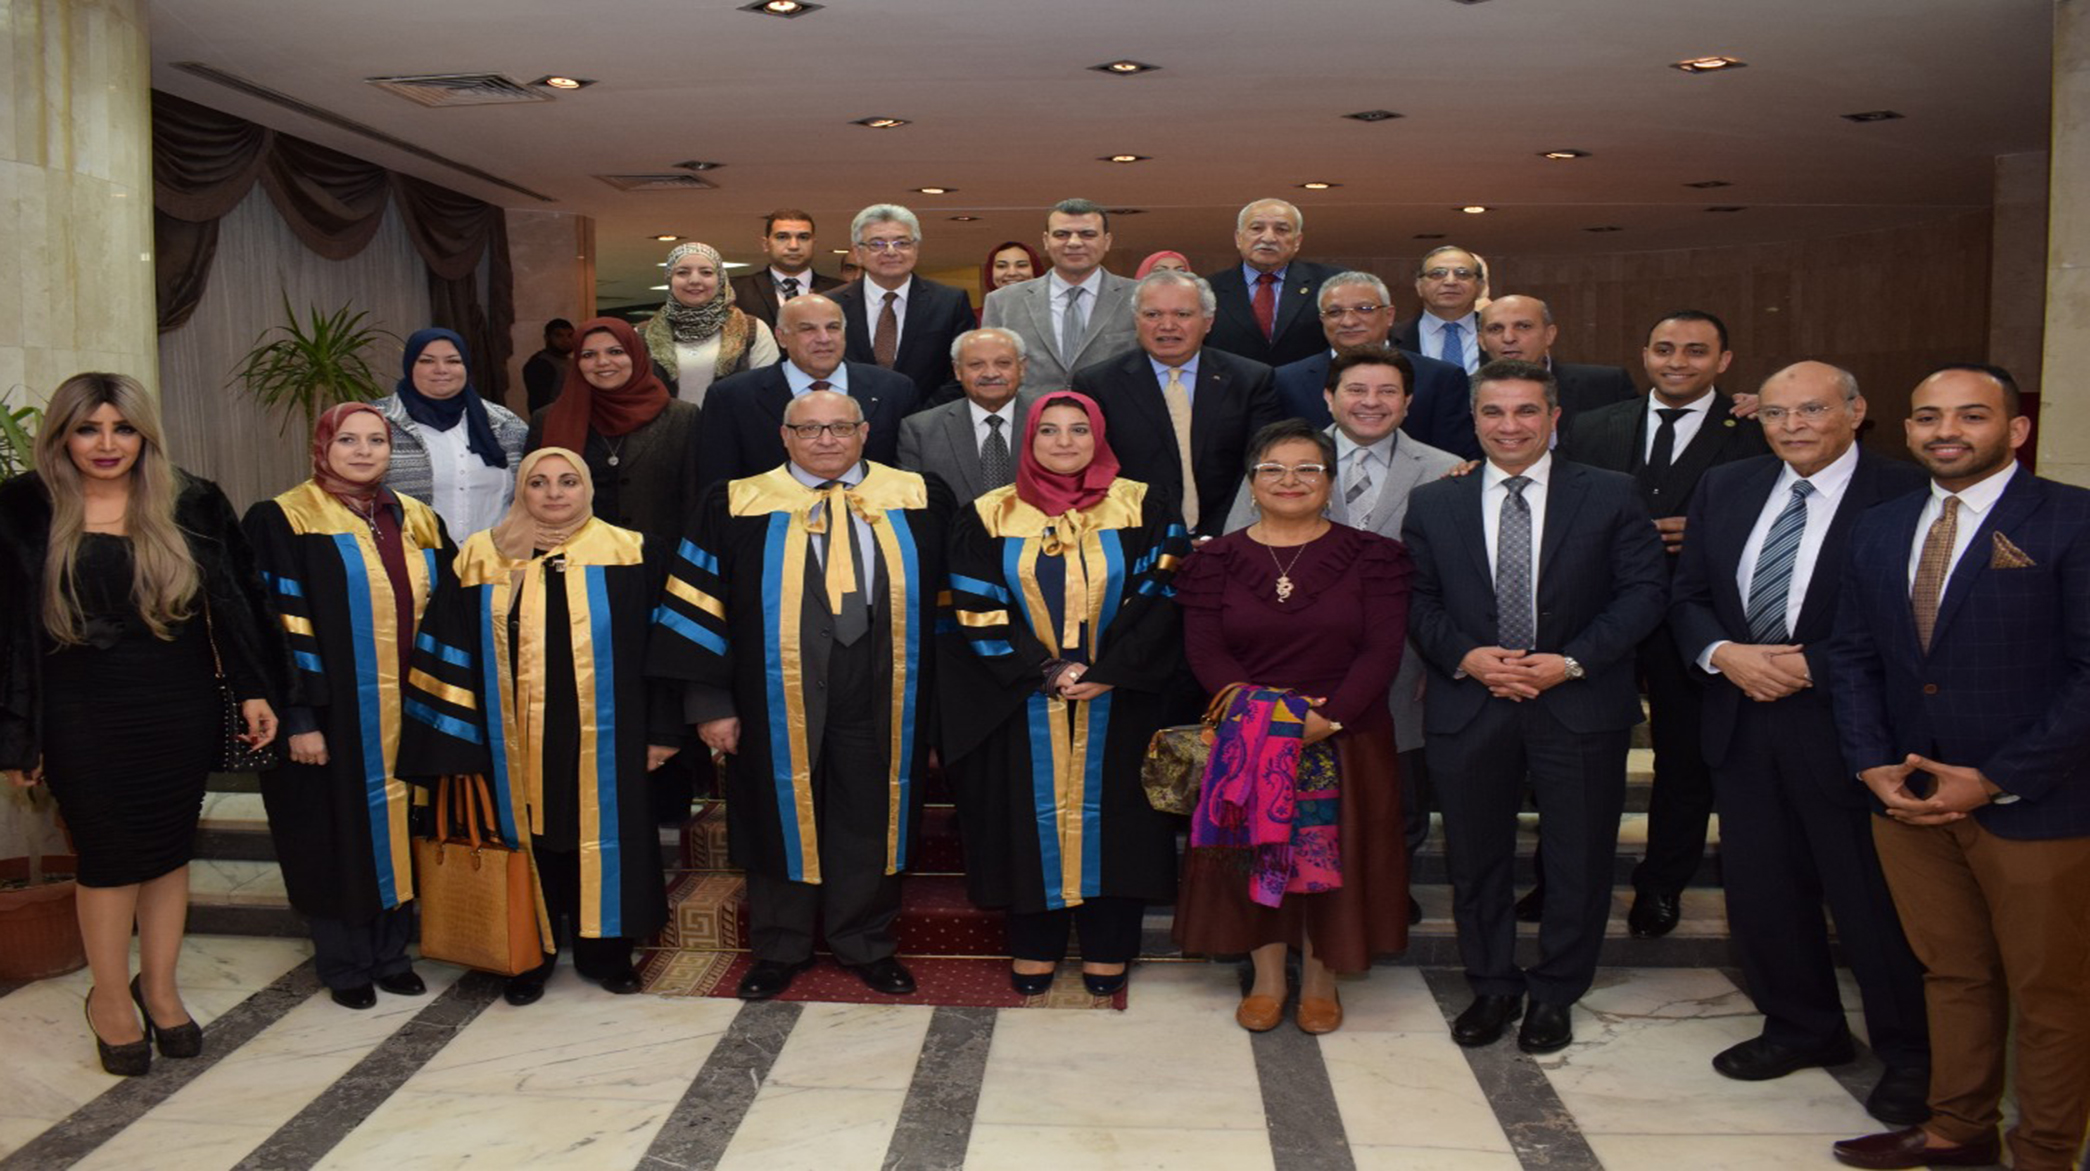 Ain Shams University President honors the stars of art, politics and society in the graduation ceremony of the students of the Faculty of Computers and Information Sciences